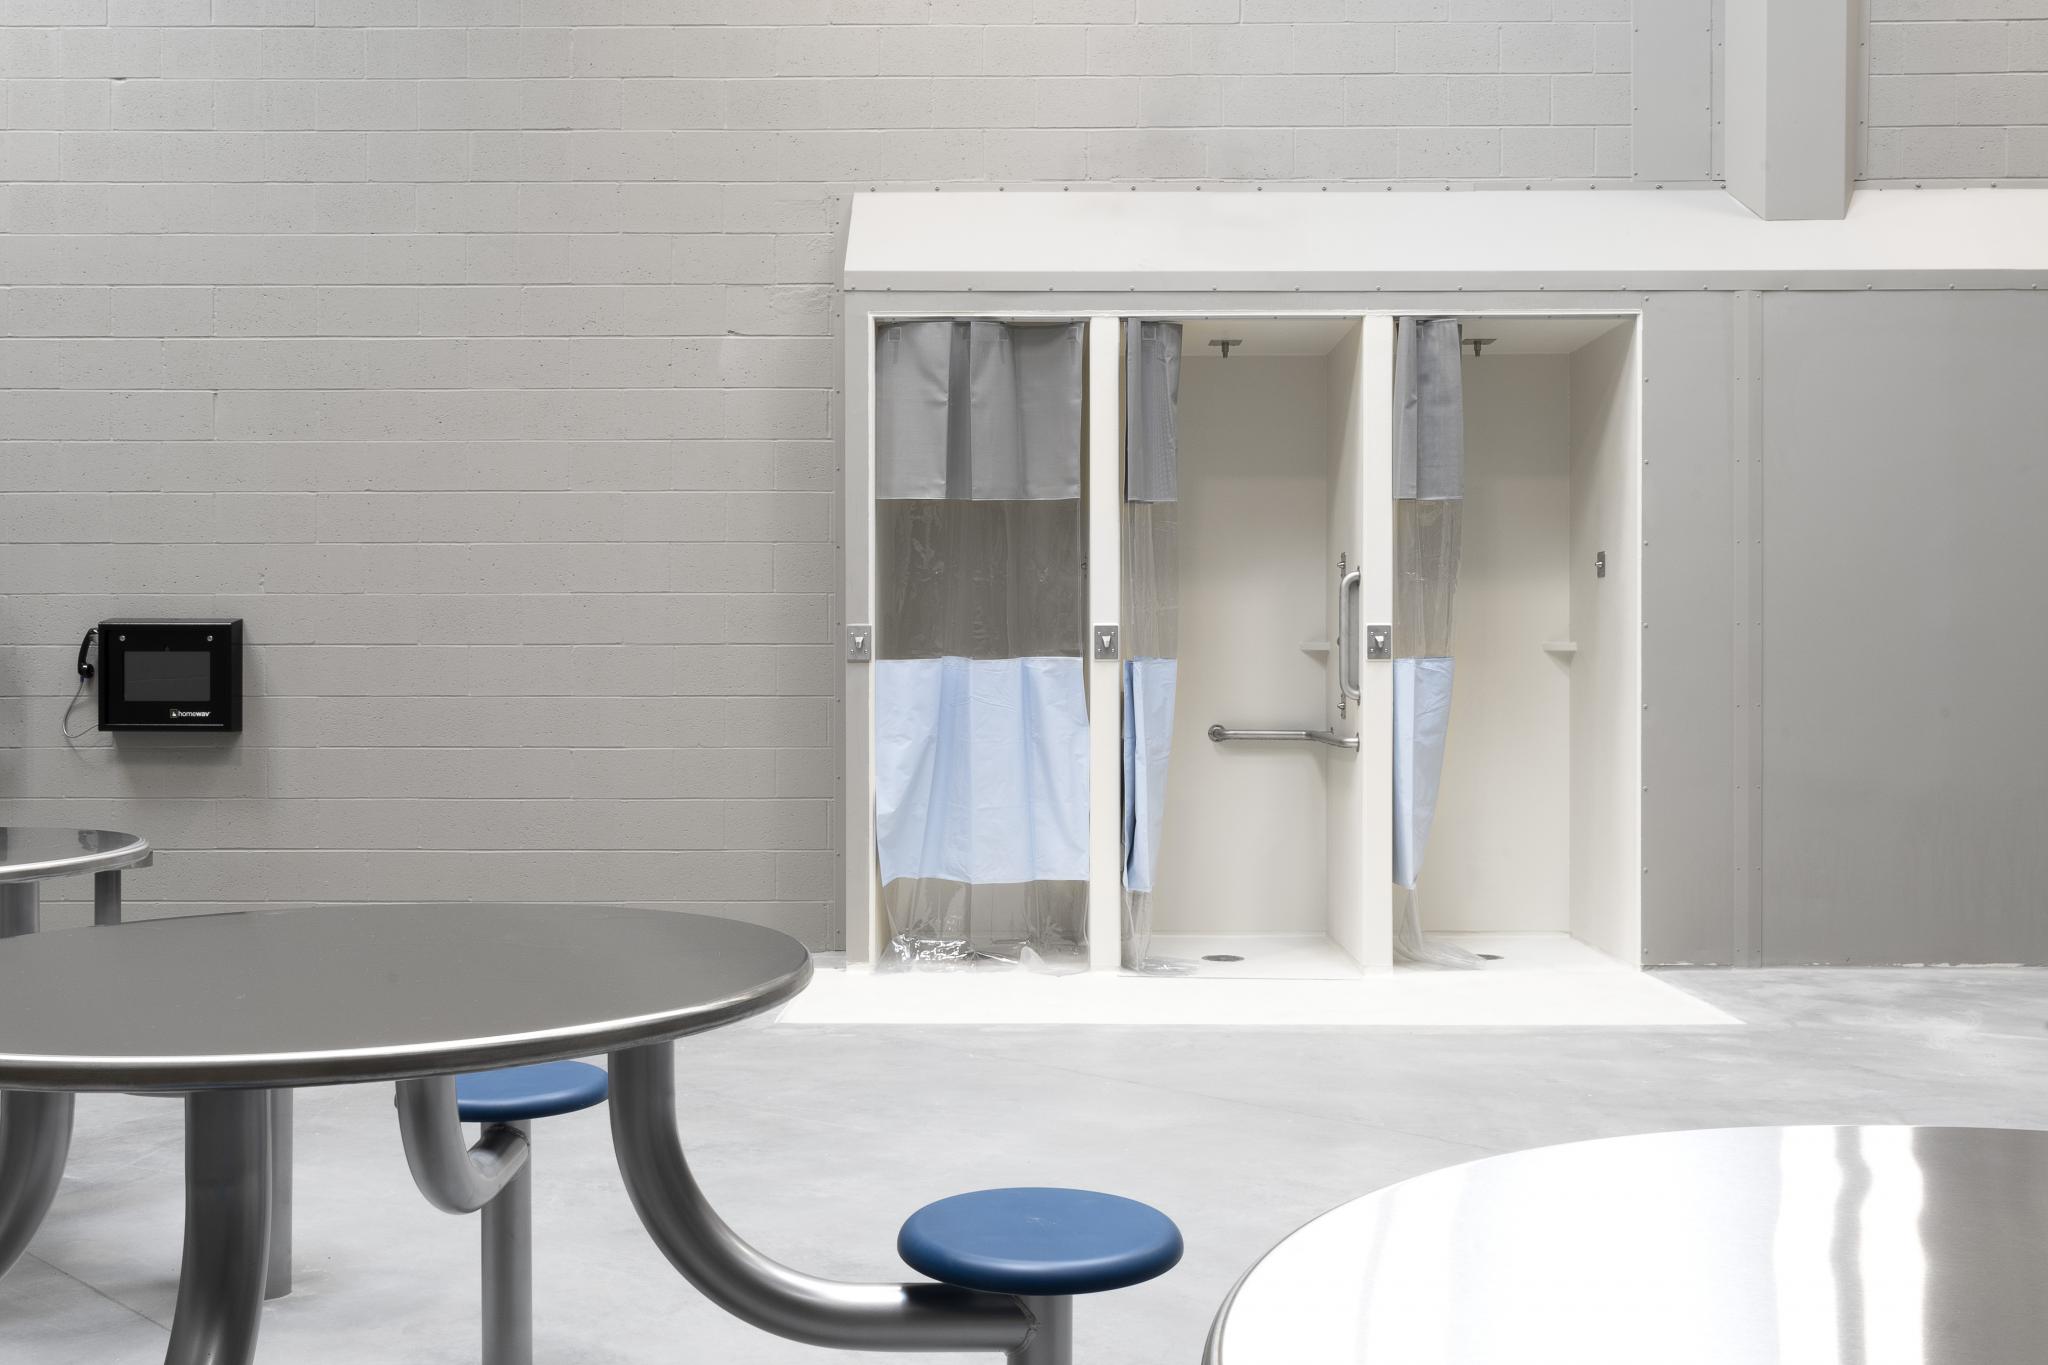 image of a table with chairs and shower stalls